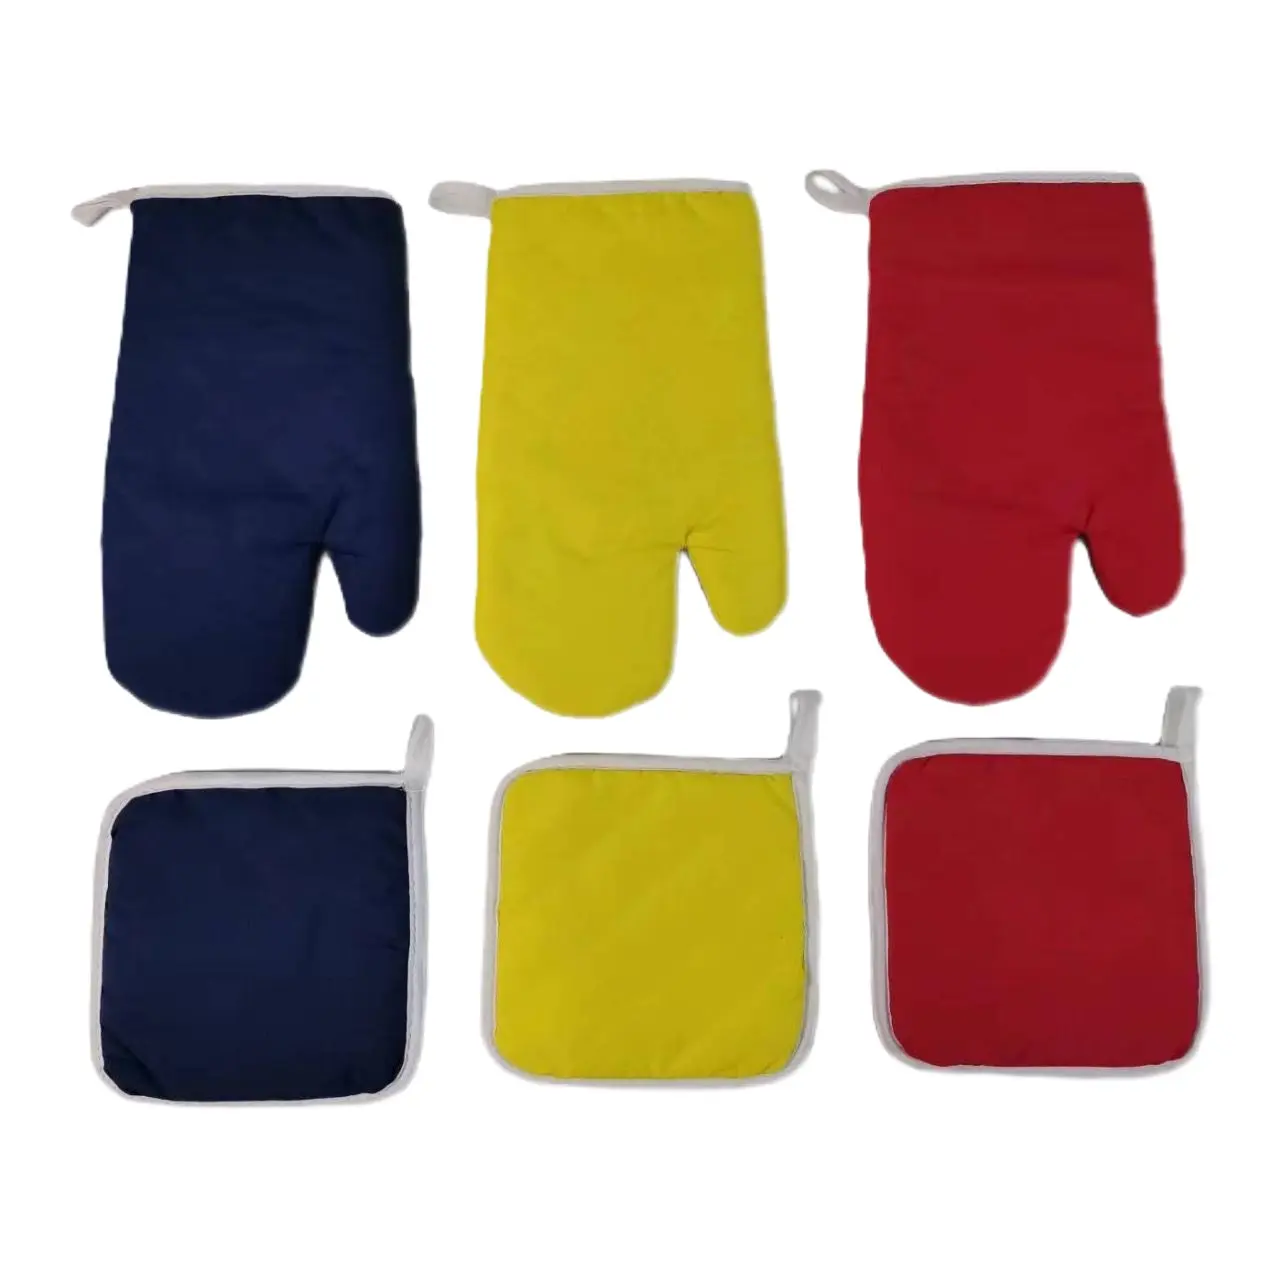 Customizable Sublimation Oven Mitts Microwave Gloves Pot Holder Heat Resistant Cotton Fabric for Kitchen Cooking and Baking